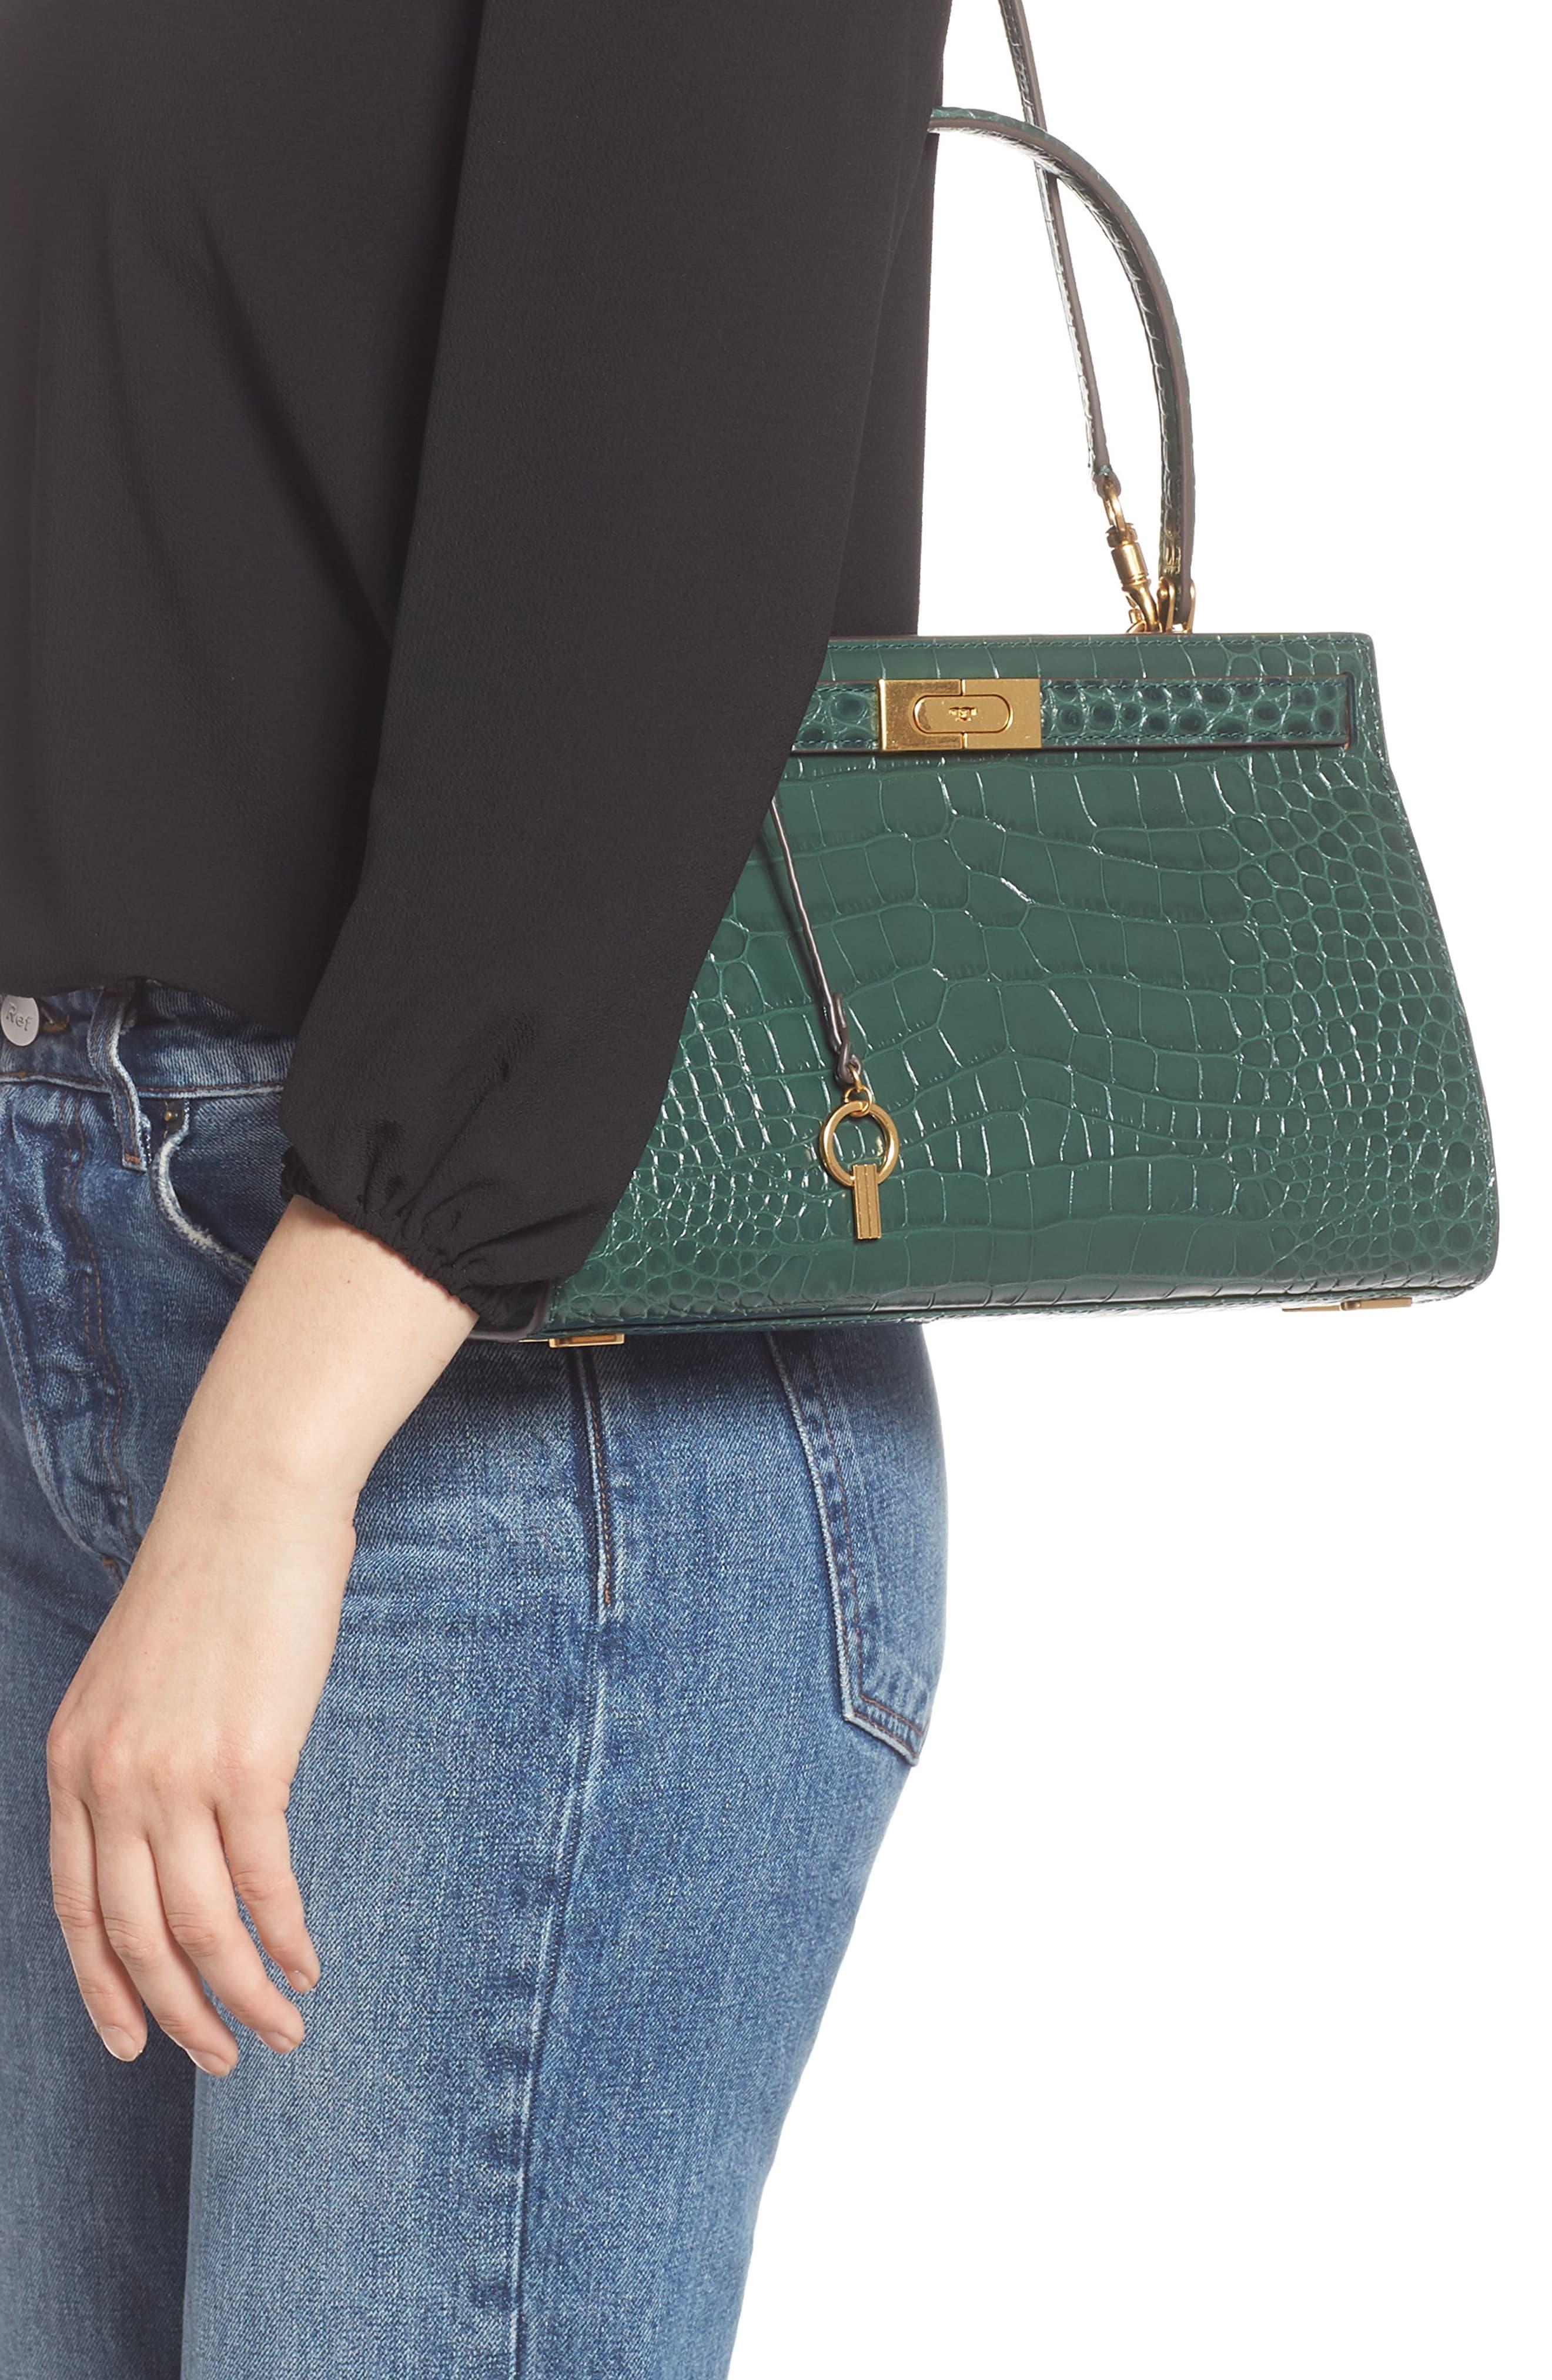 Tory Burch Lee Radziwill Embossed Small Satchel In Green Calfskin in ...